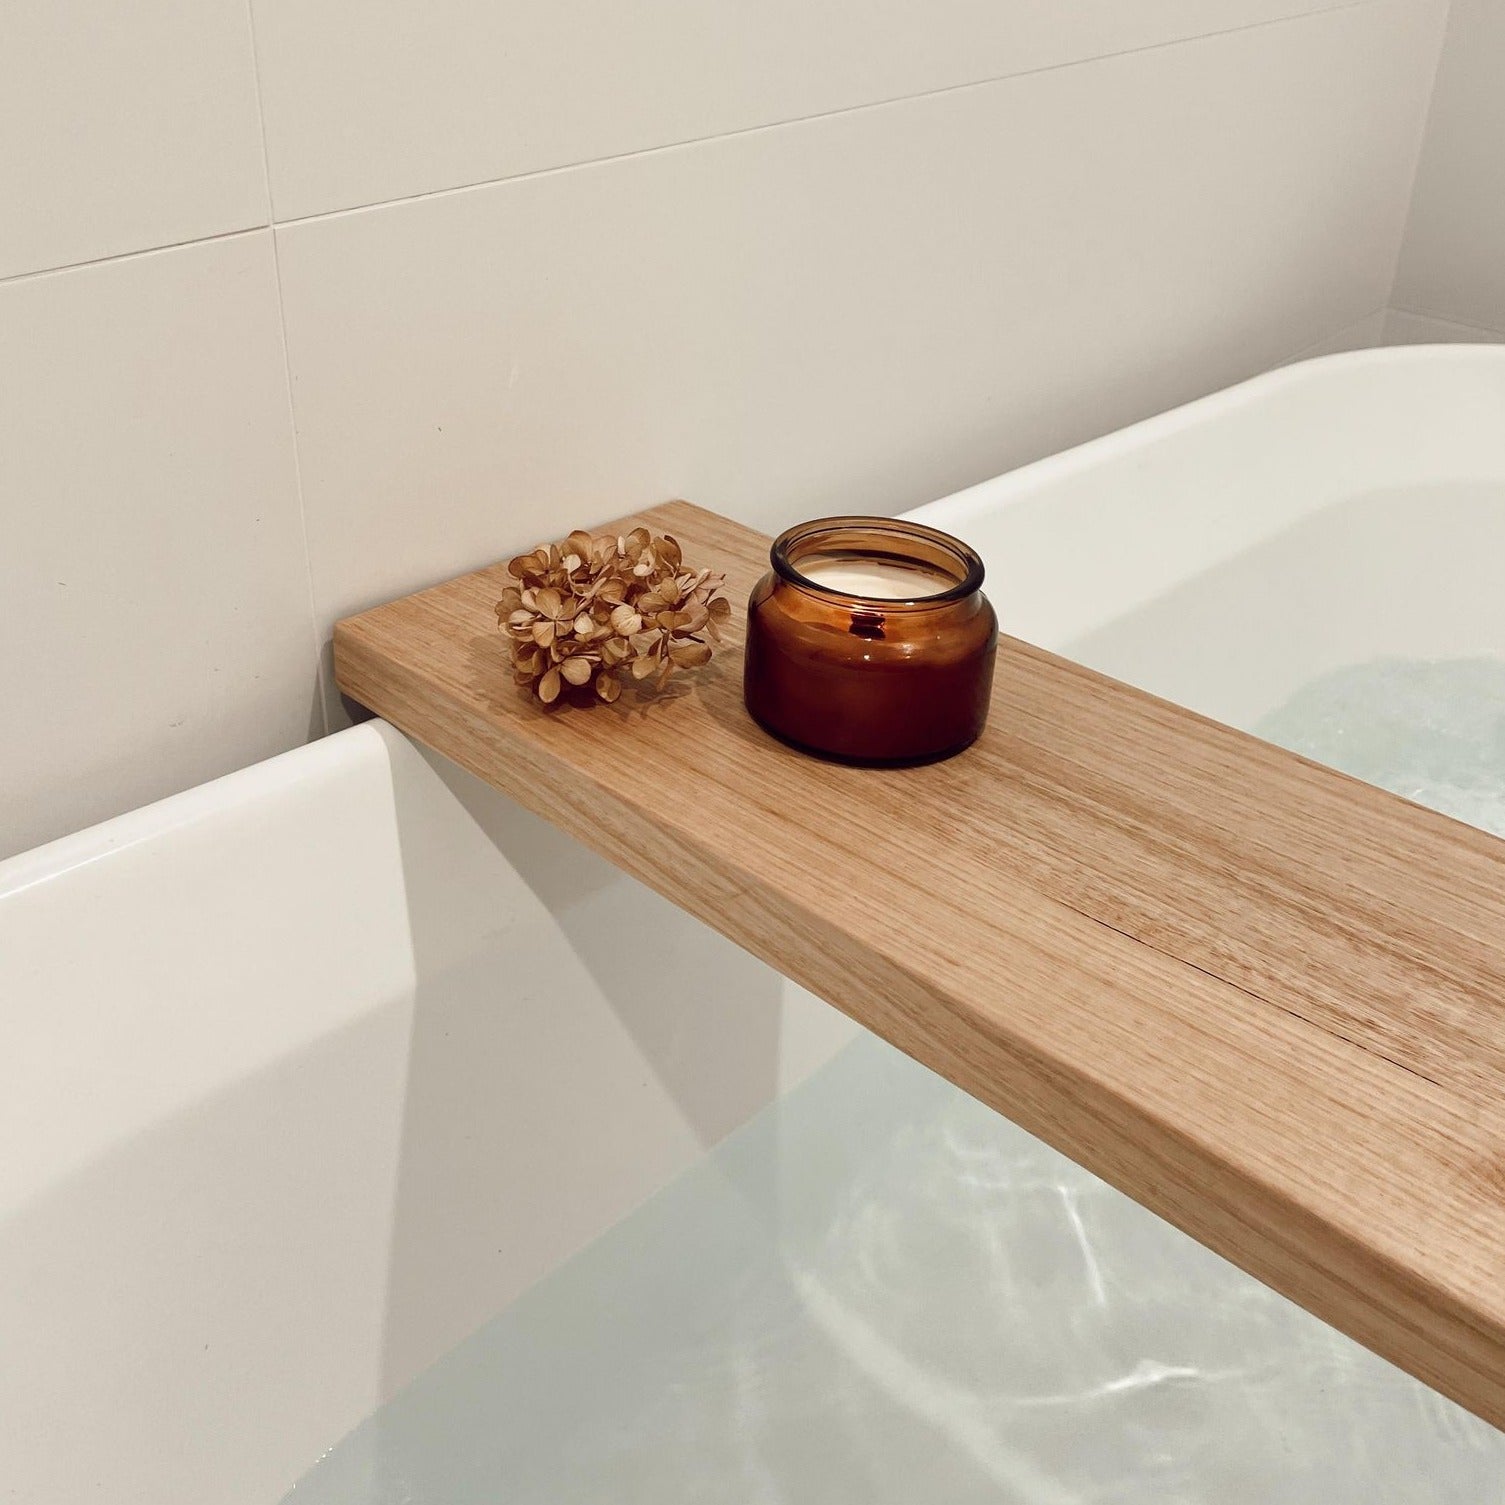 bath caddy with candle